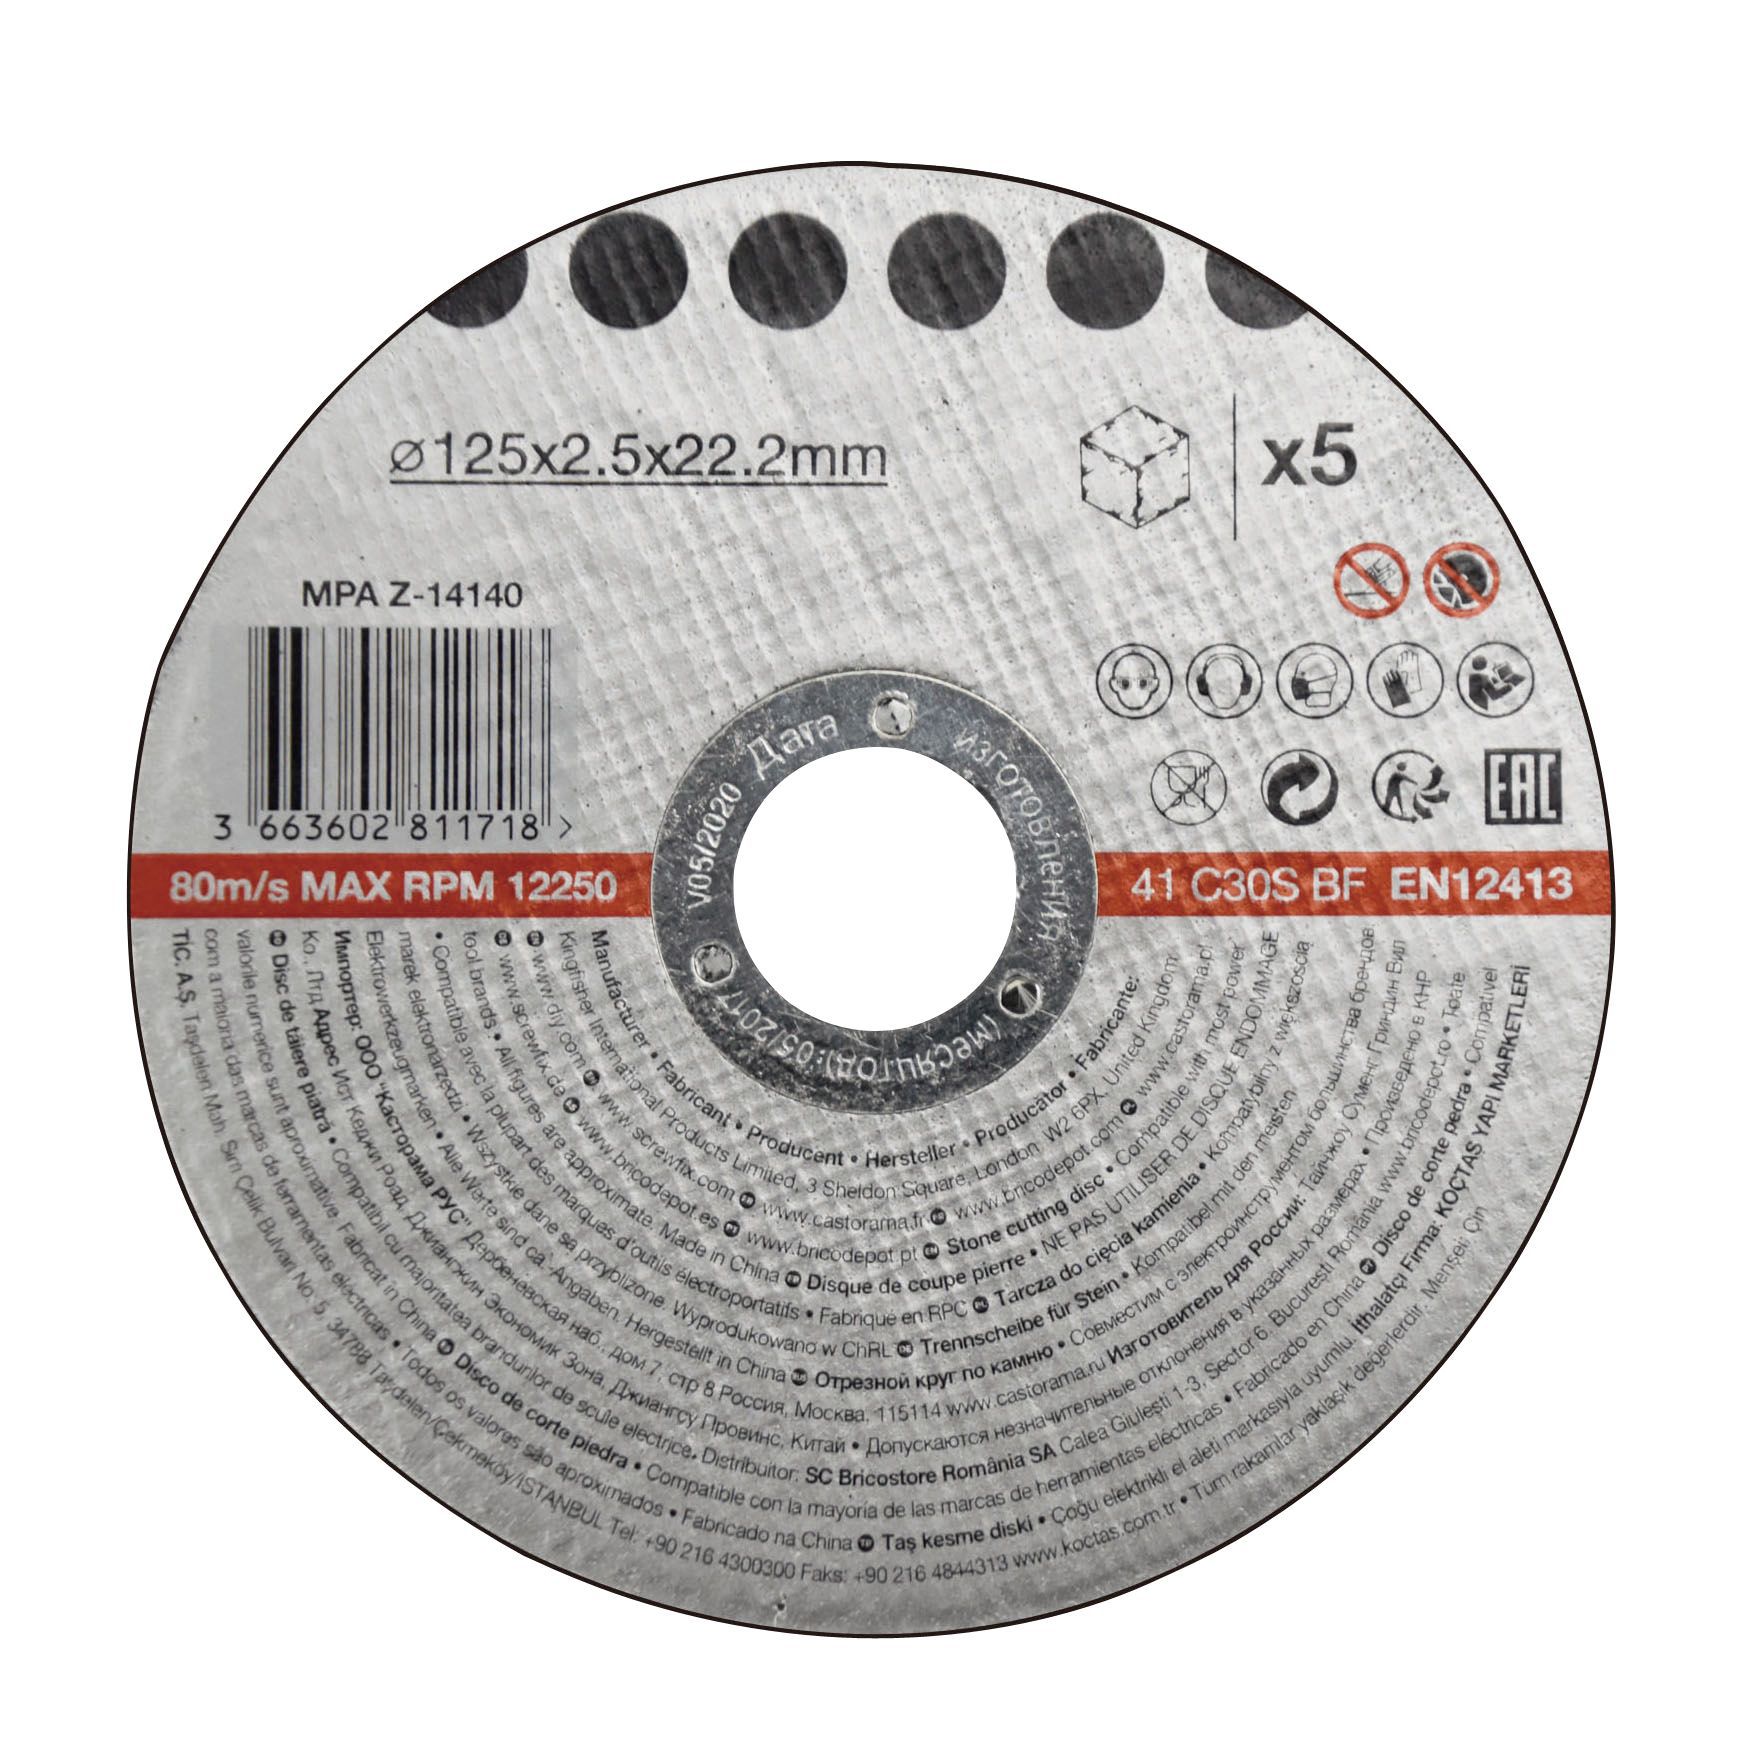 Stone Cutting disc (Dia)125mm, Pack of 5